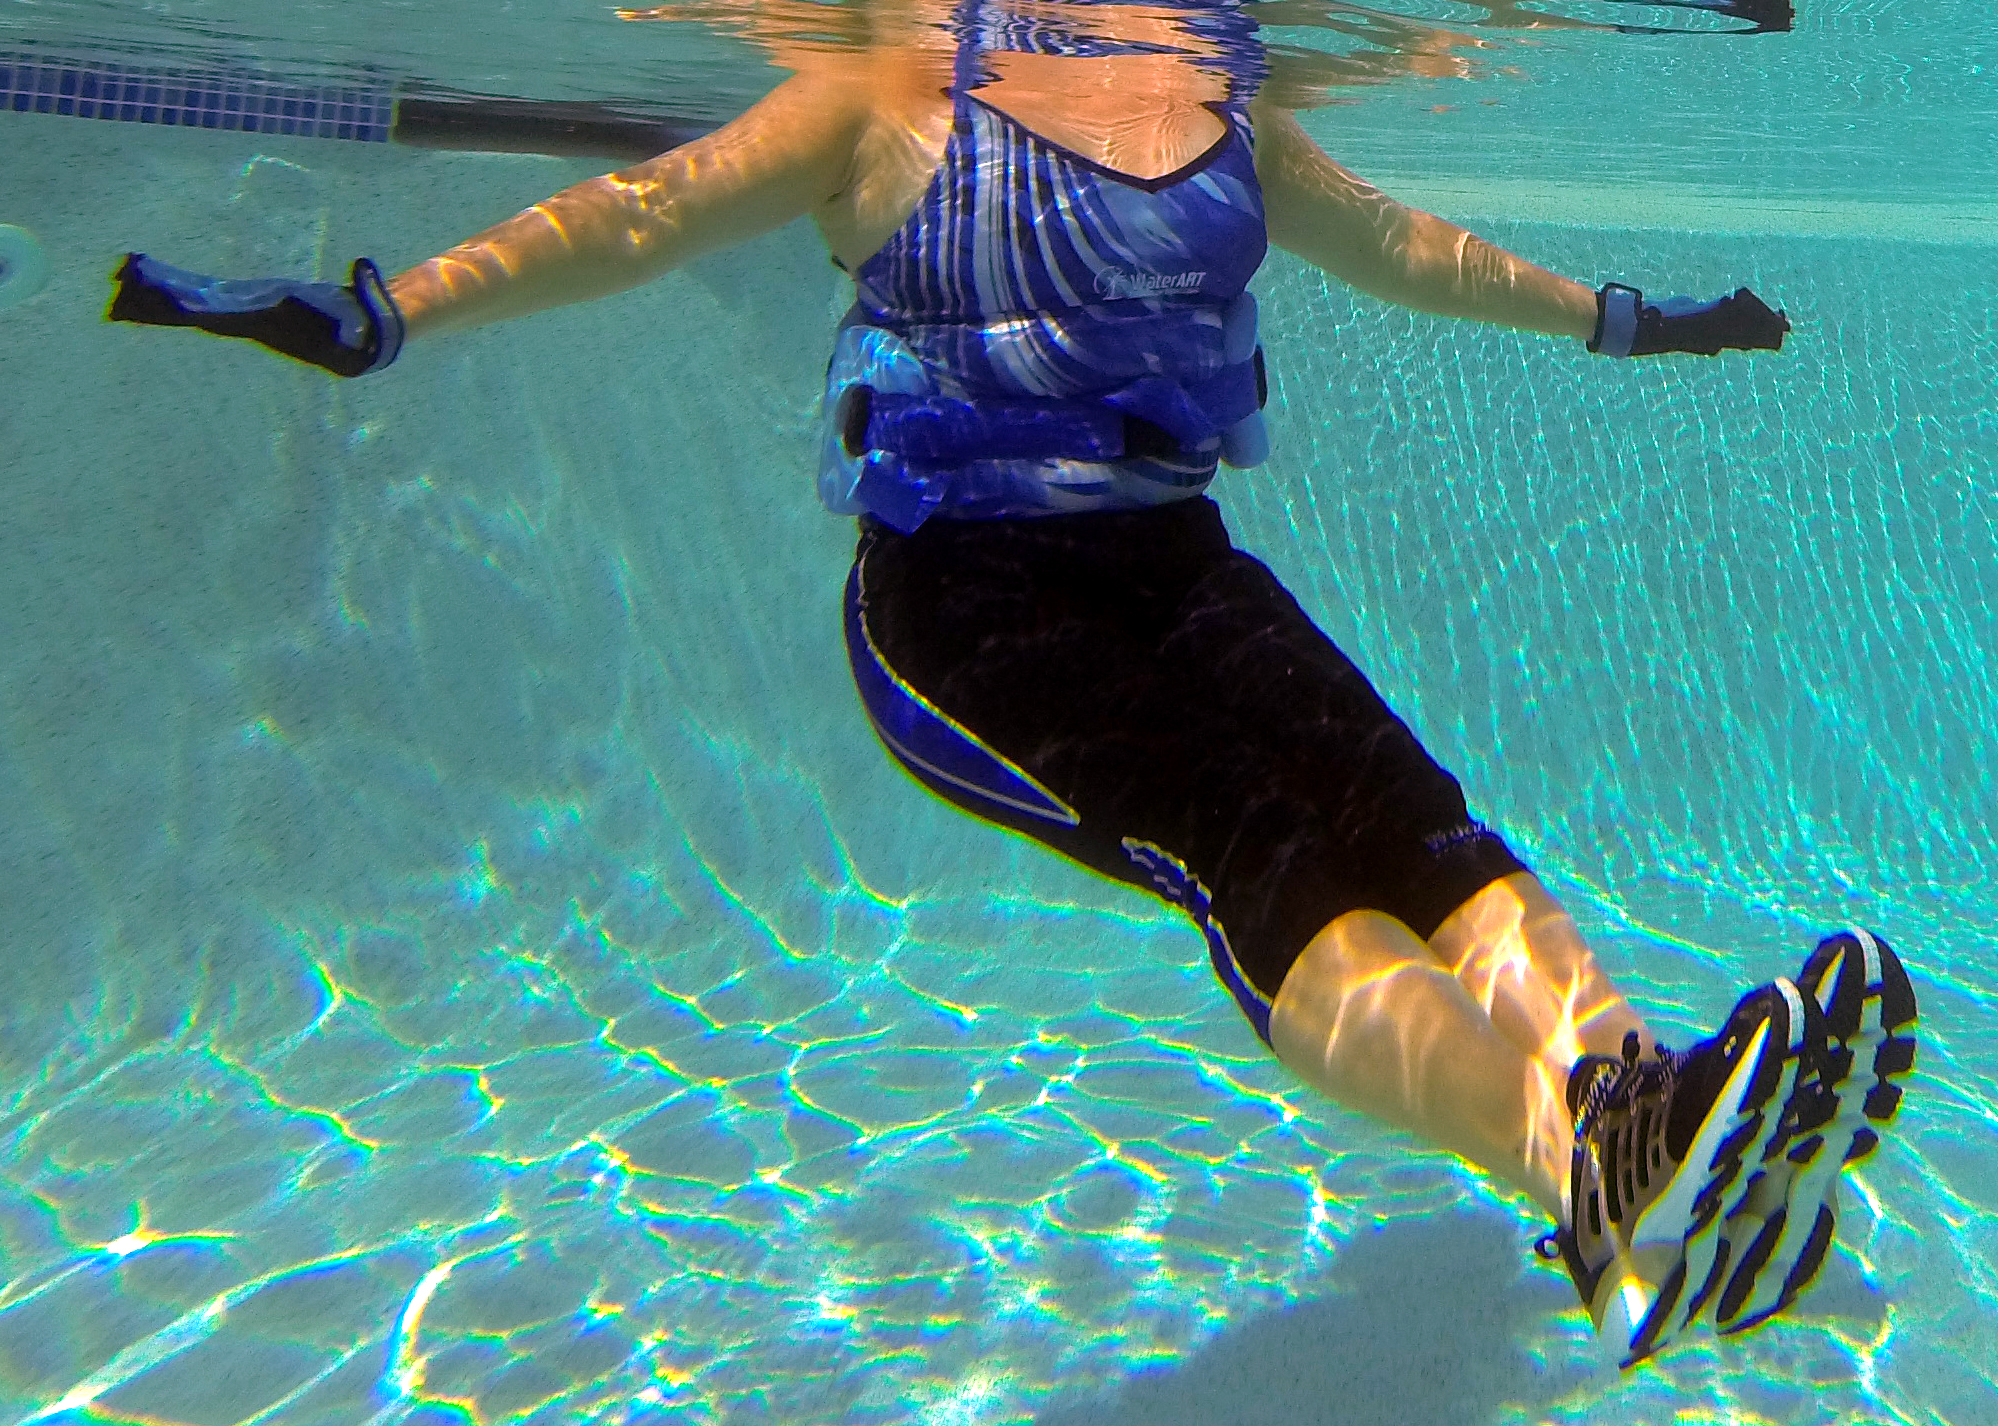 Aquatic Fitness Rehabilitation For The Spine Neck Shoulders And Arms Waterart Fitness Land